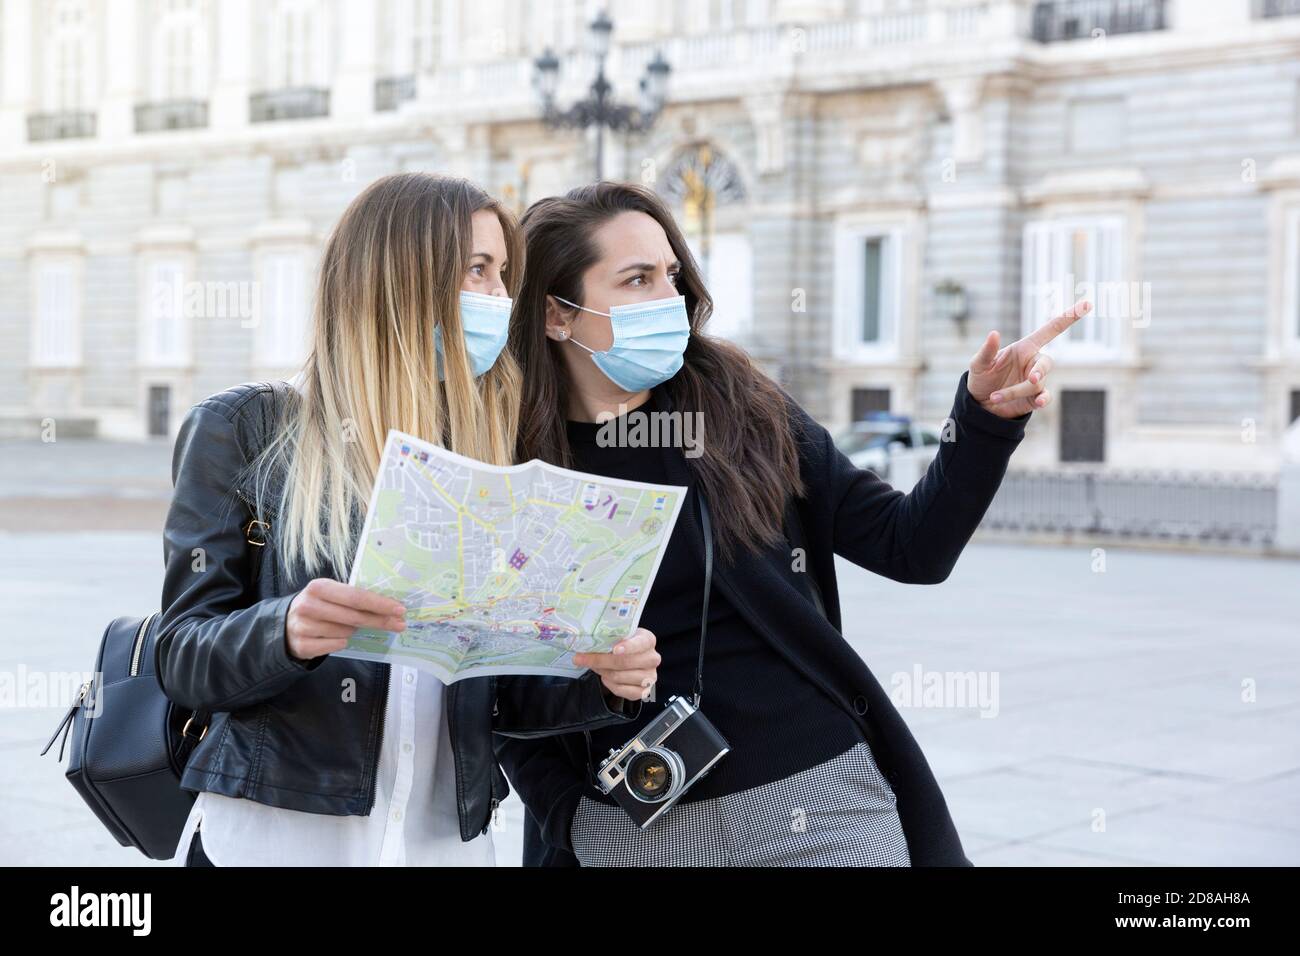 Two girls traveling together in the city. They have a tourist map and are wearing medical masks. Concept of travel and new normal. Stock Photo